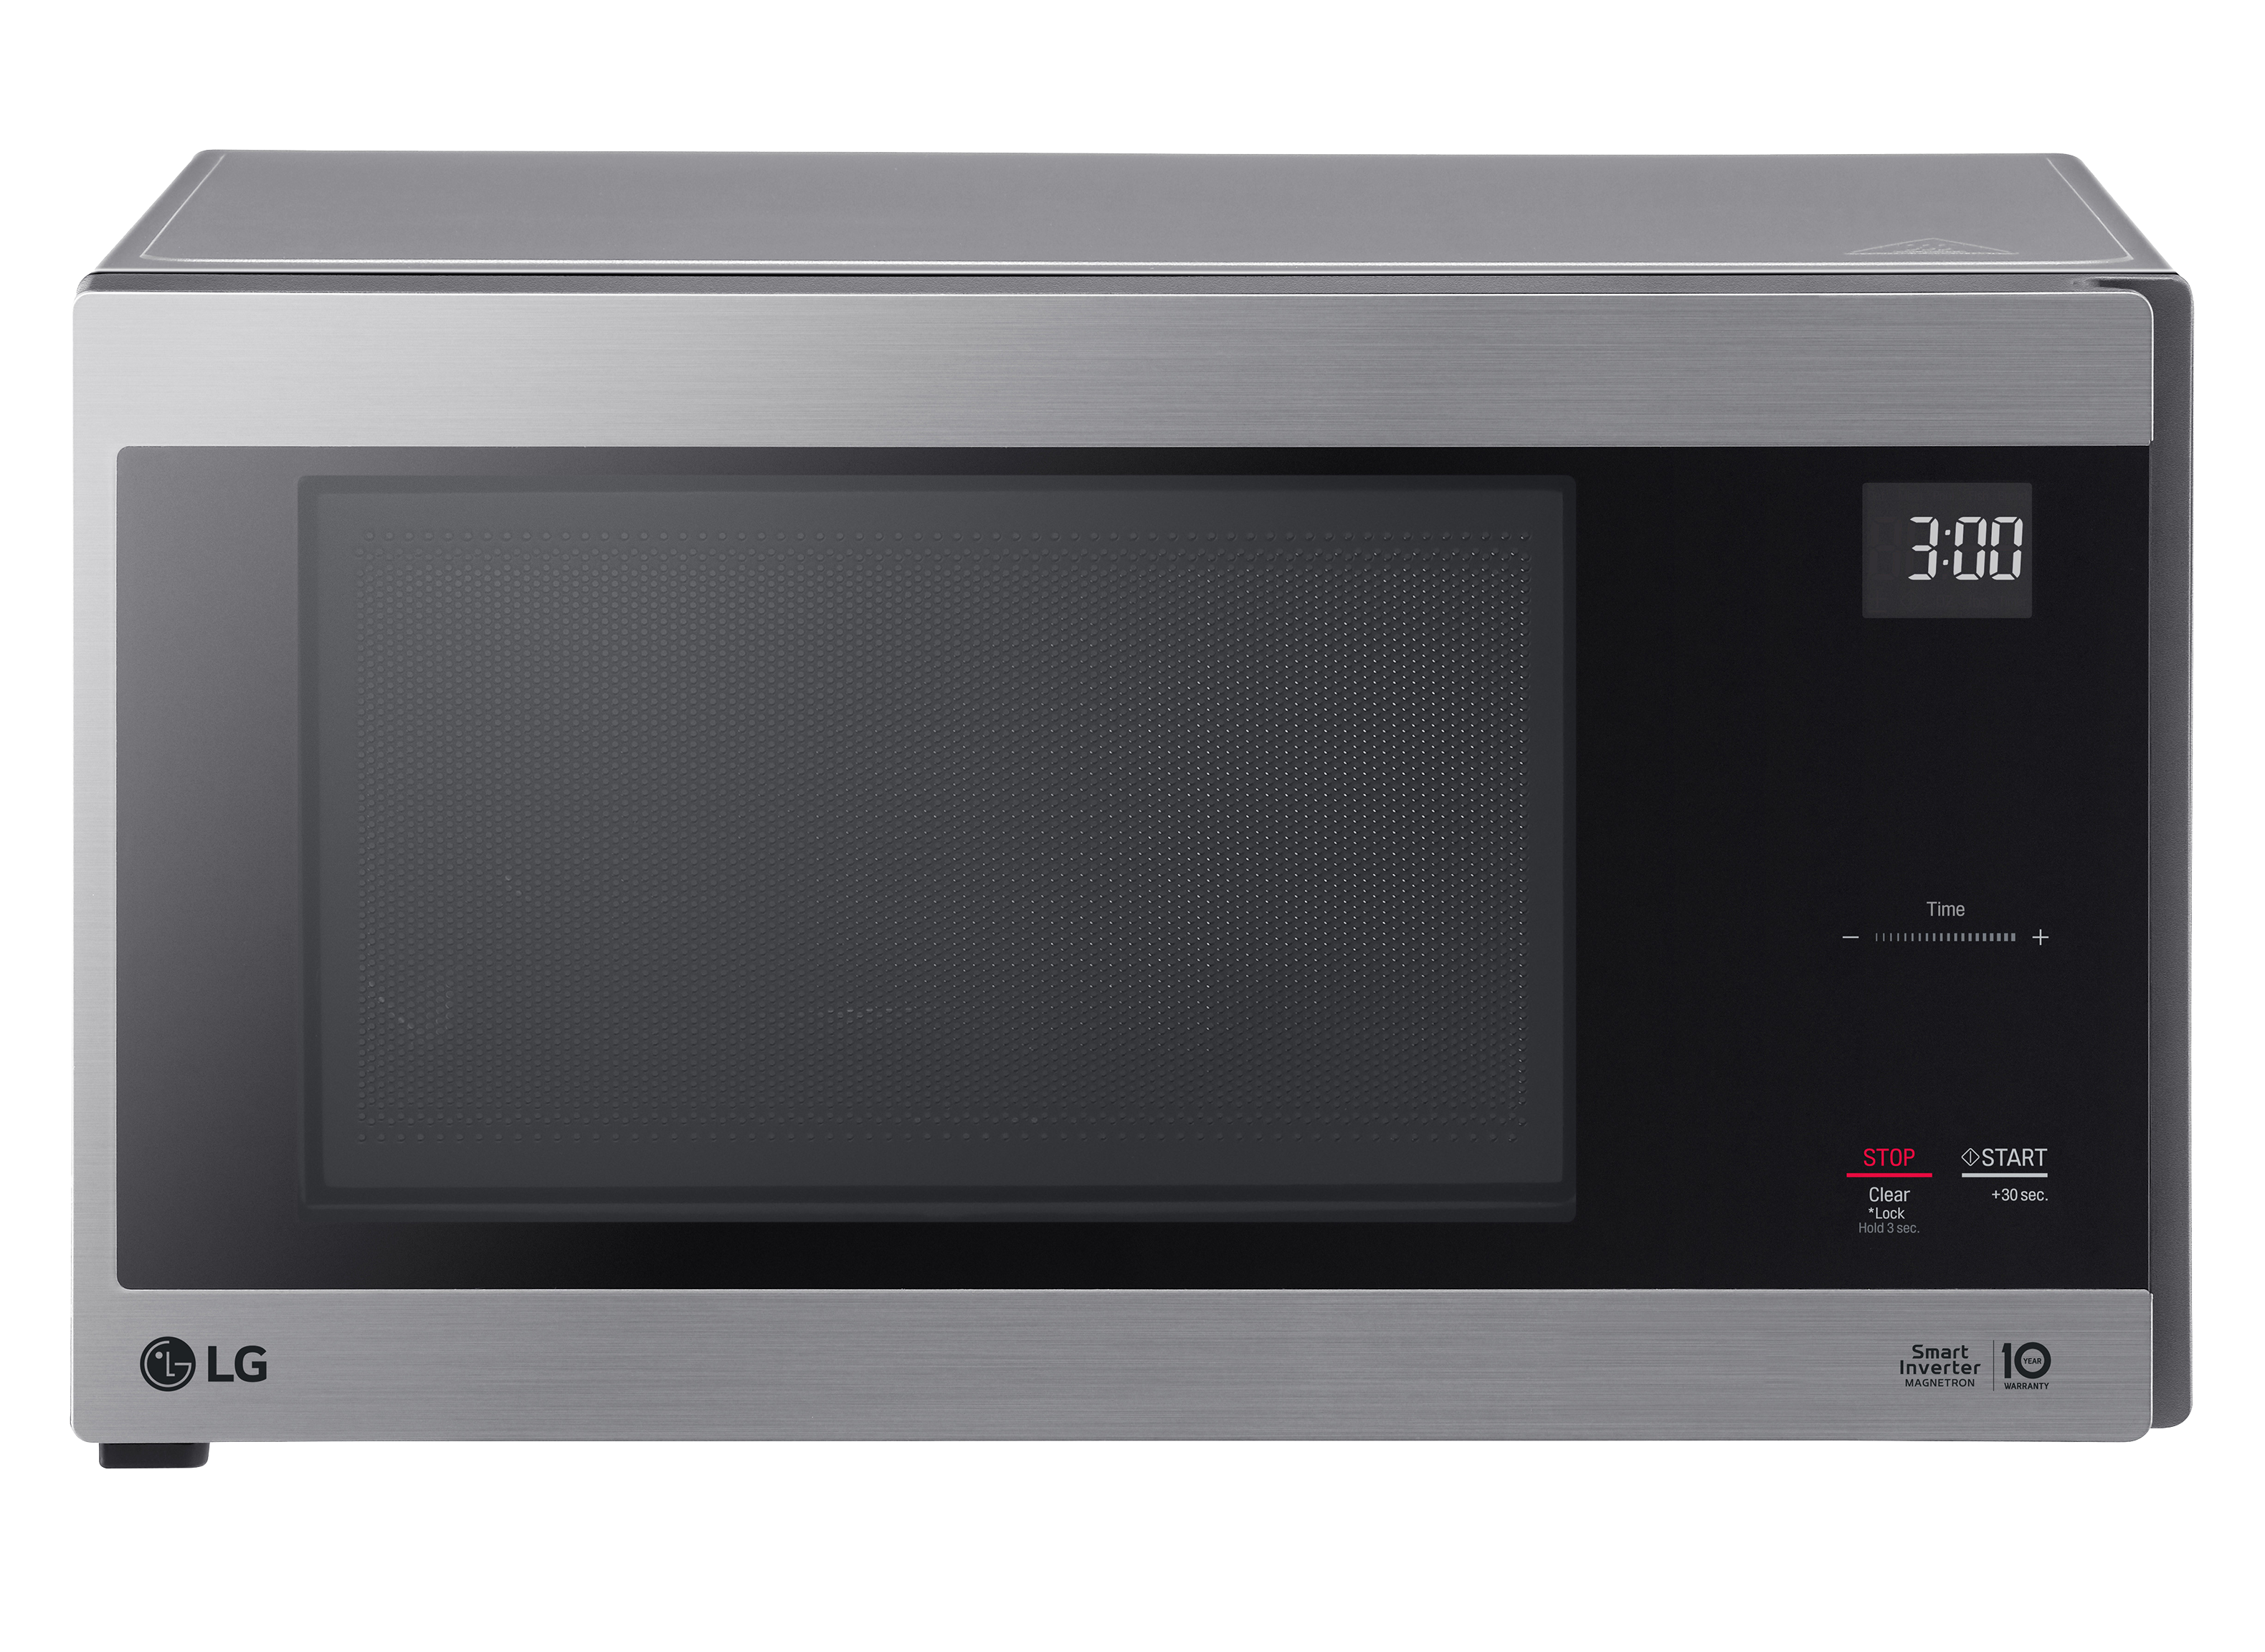 LG MSWN1590L Microwave Oven Review - Consumer Reports